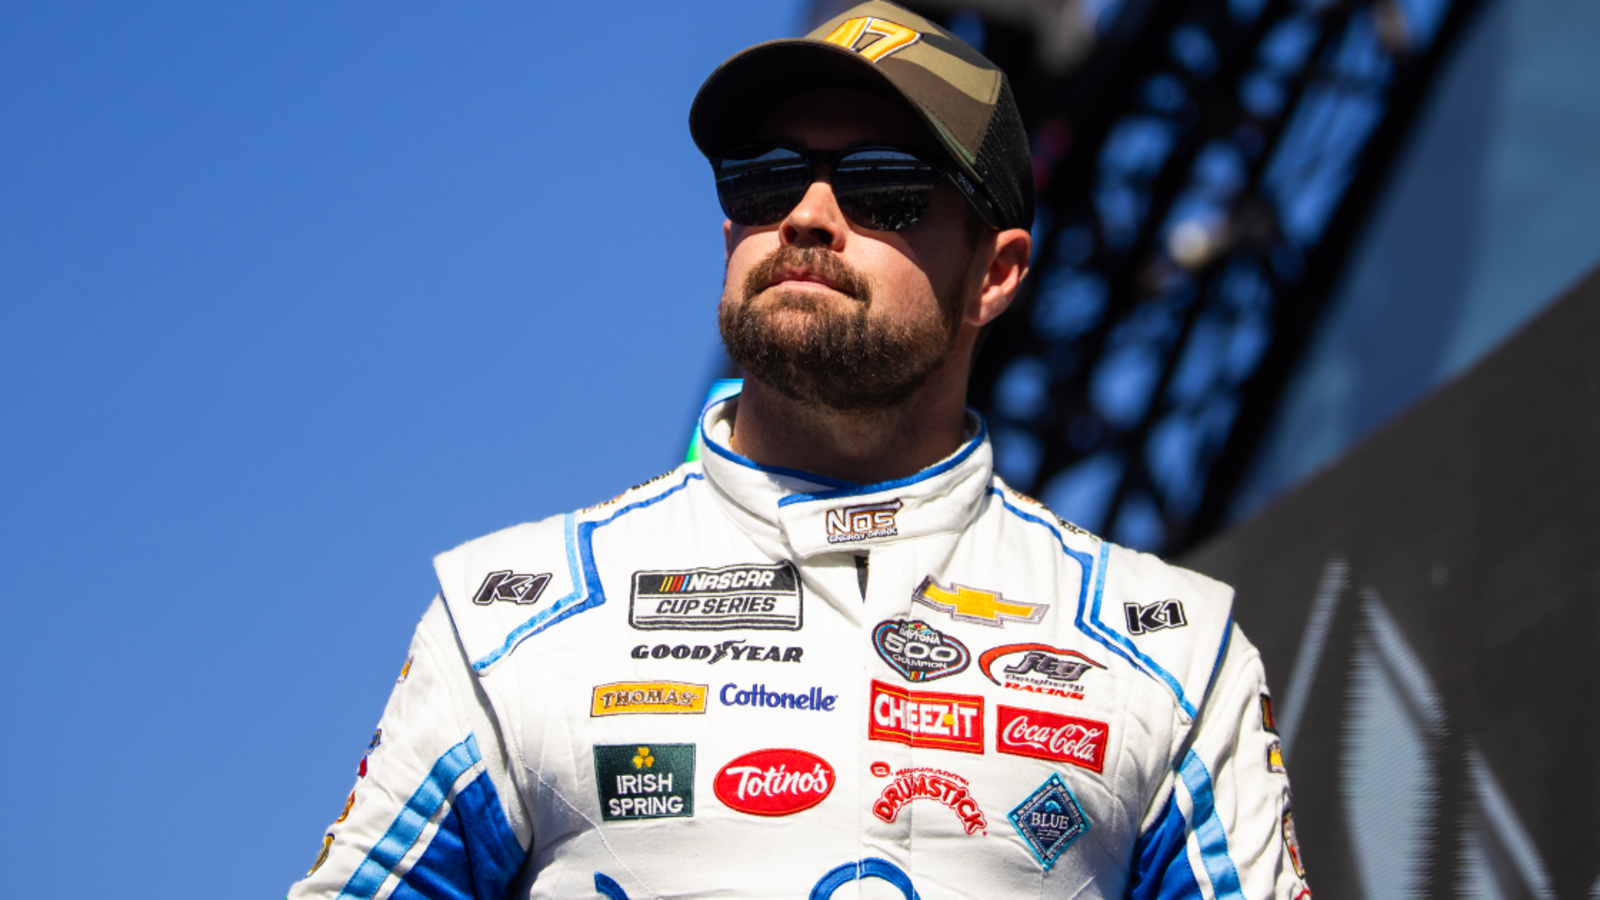 Ricky Stenhouse Jr. on aftermath of Kyle Busch fight: ‘You always feel bad after the fact’